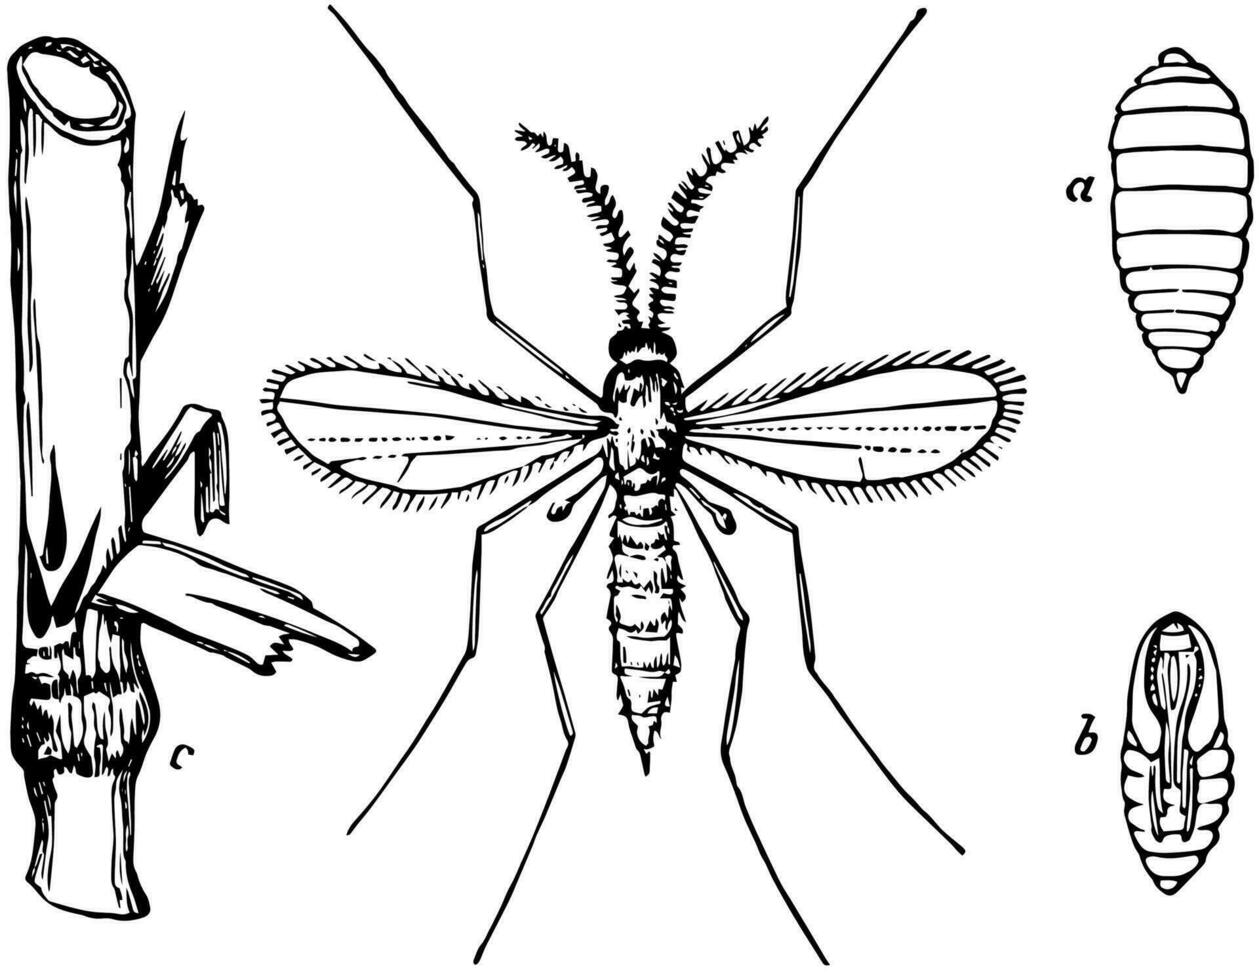 Stages of the Hessian Fly, vintage illustration. vector